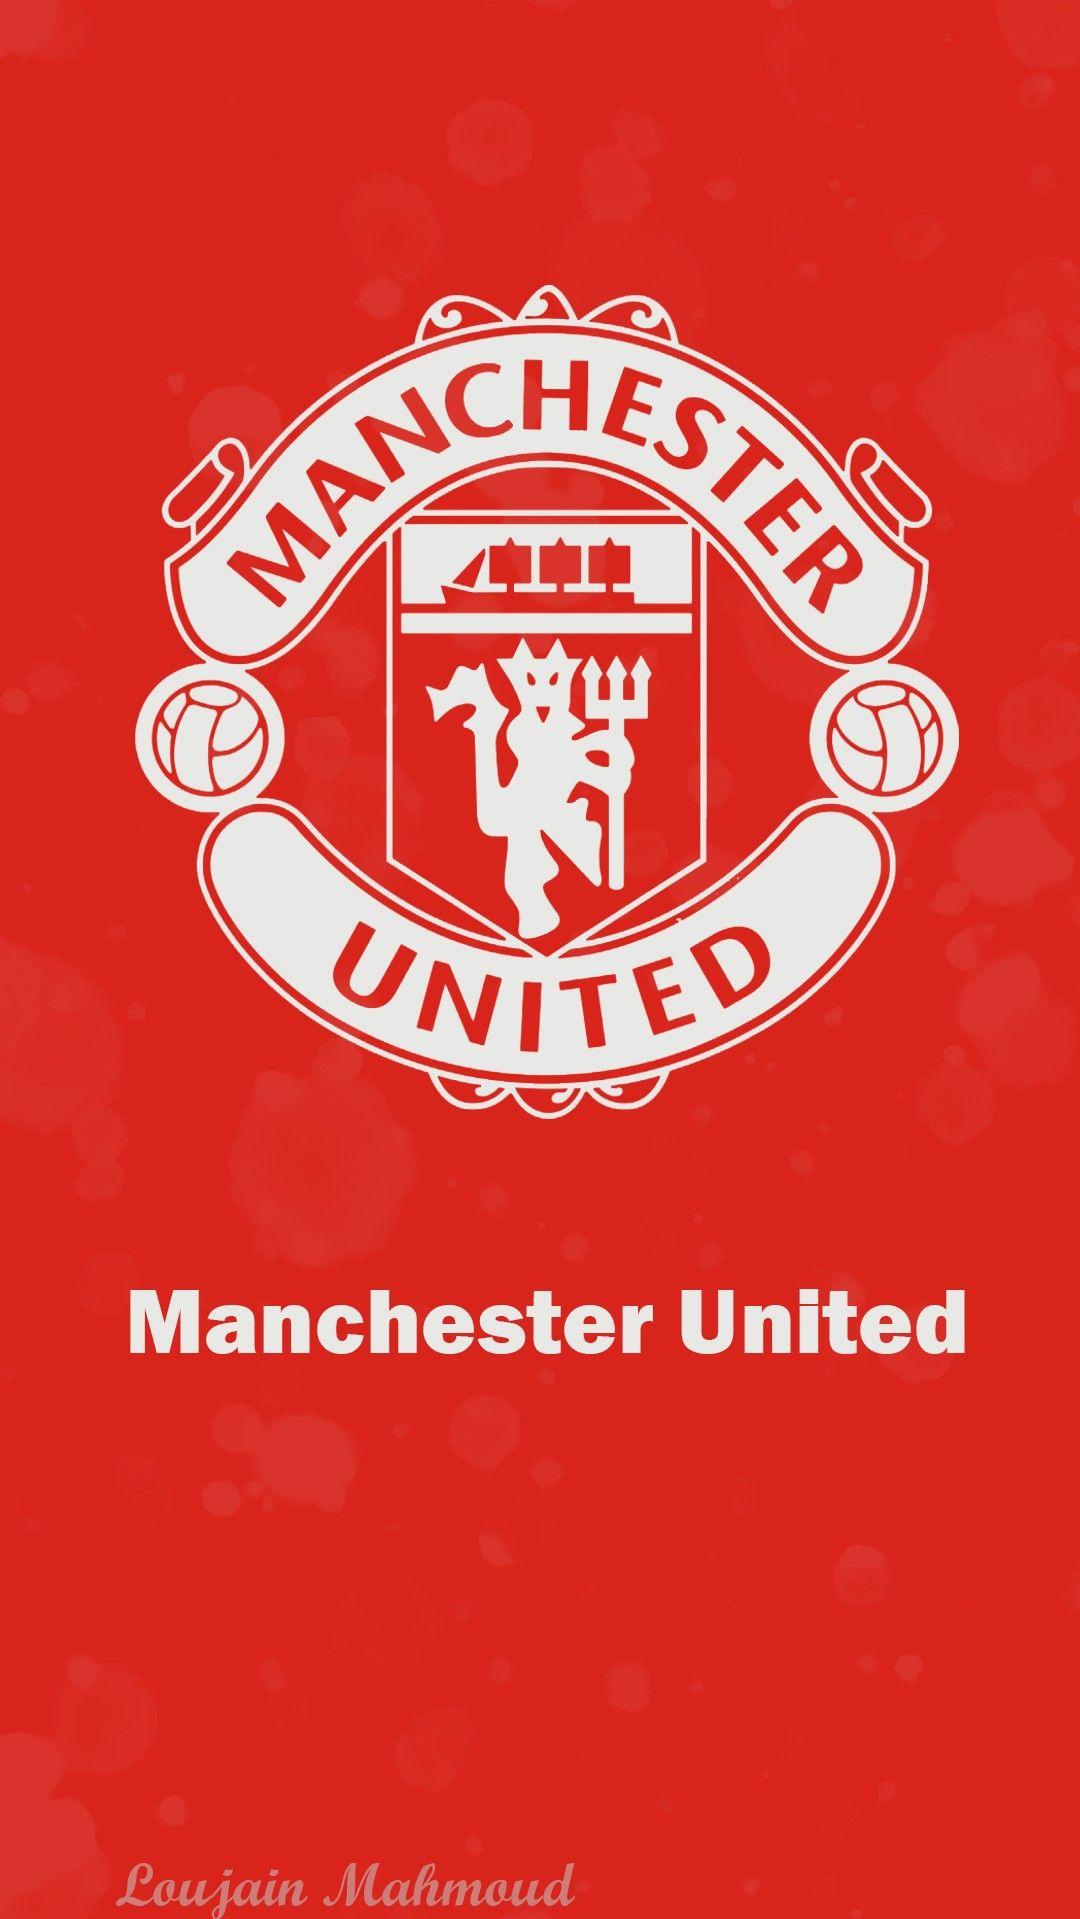 Manchester United Wallpaper In